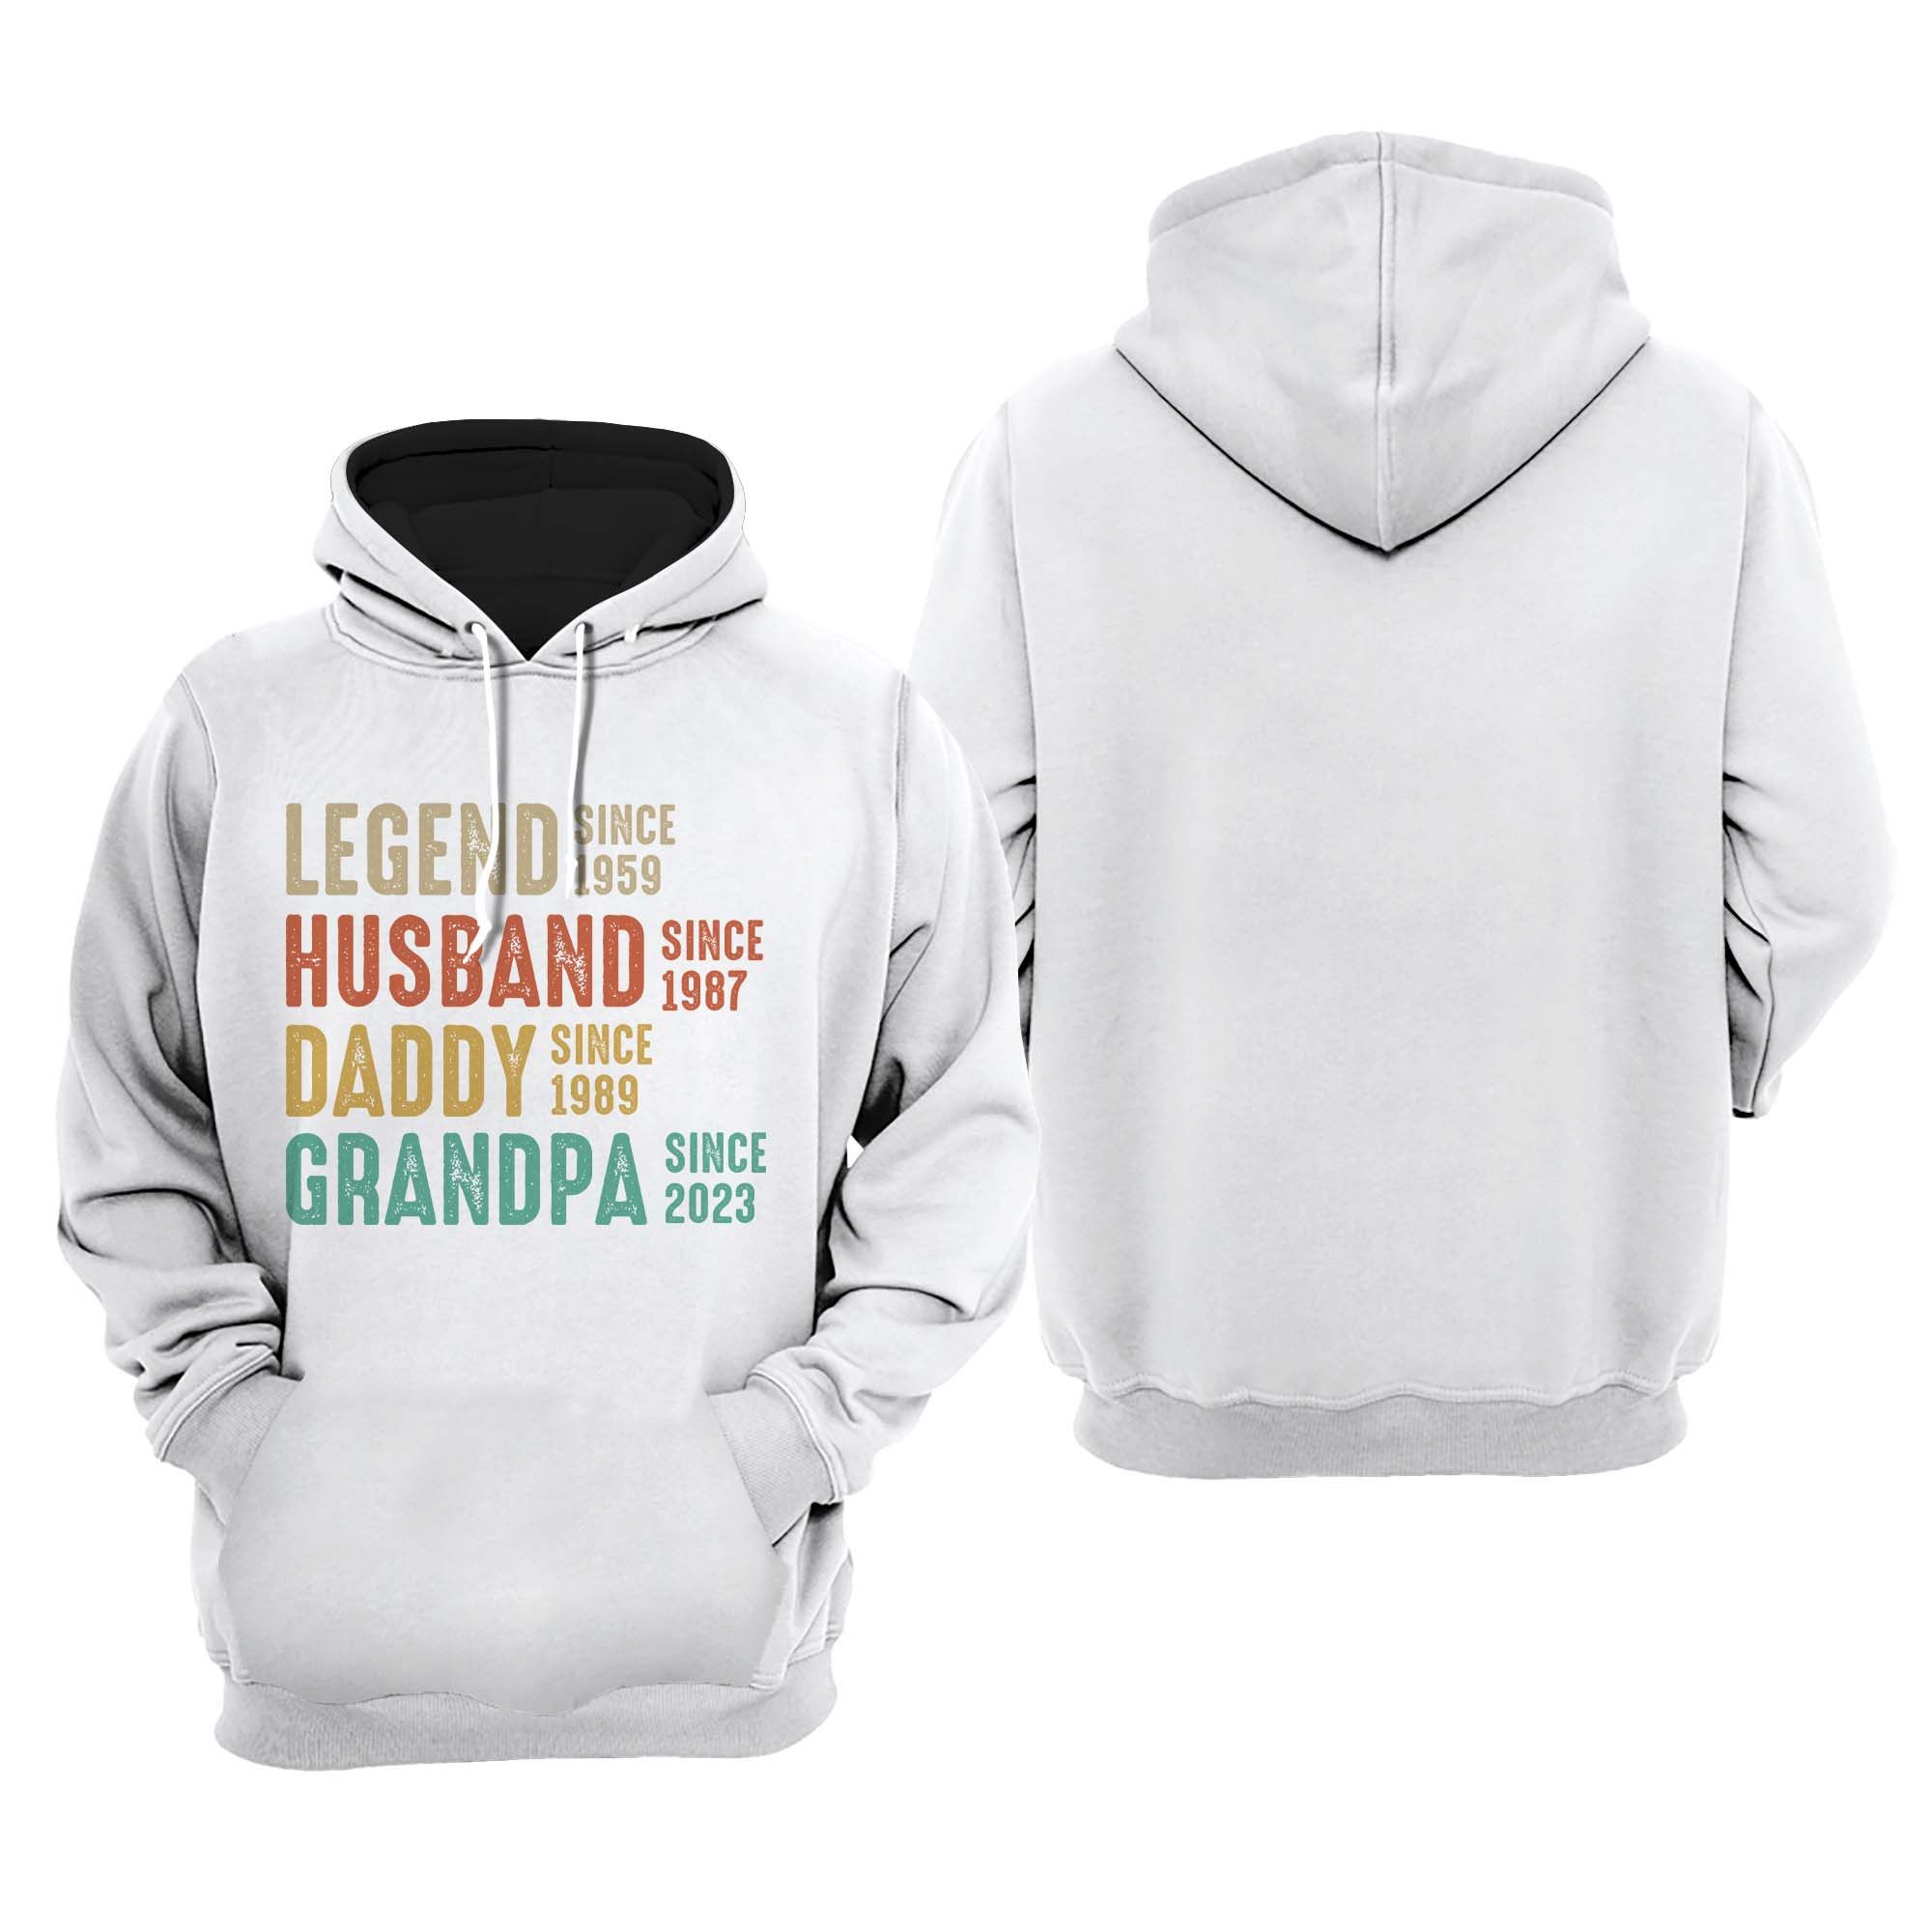 Personalized Gift for Dad, Gift for Grandpa, Custom T Shirt - Papa Bear, Family Gift, PersonalFury, Pullover Hoodie / Navy Color / 2XL